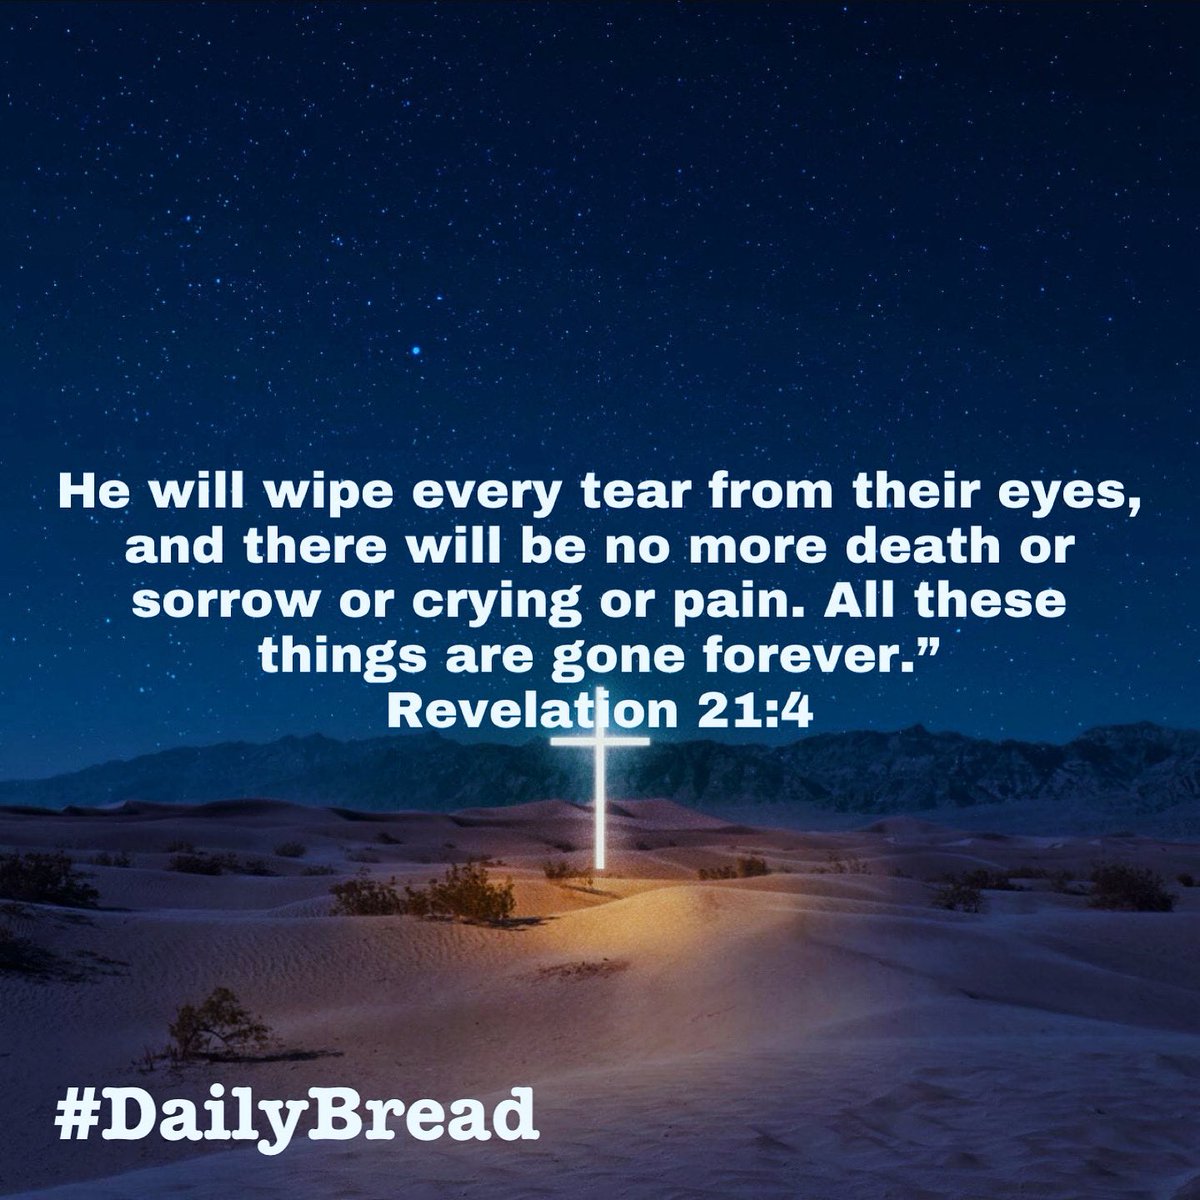 He will wipe every tear from their eyes, & there will be no more death or sorrow or crying or pain… All these things are gone forever…” 
#Revelation 21:4
#DailyBread #GodsPlan #GodsPeace #SpeakLife